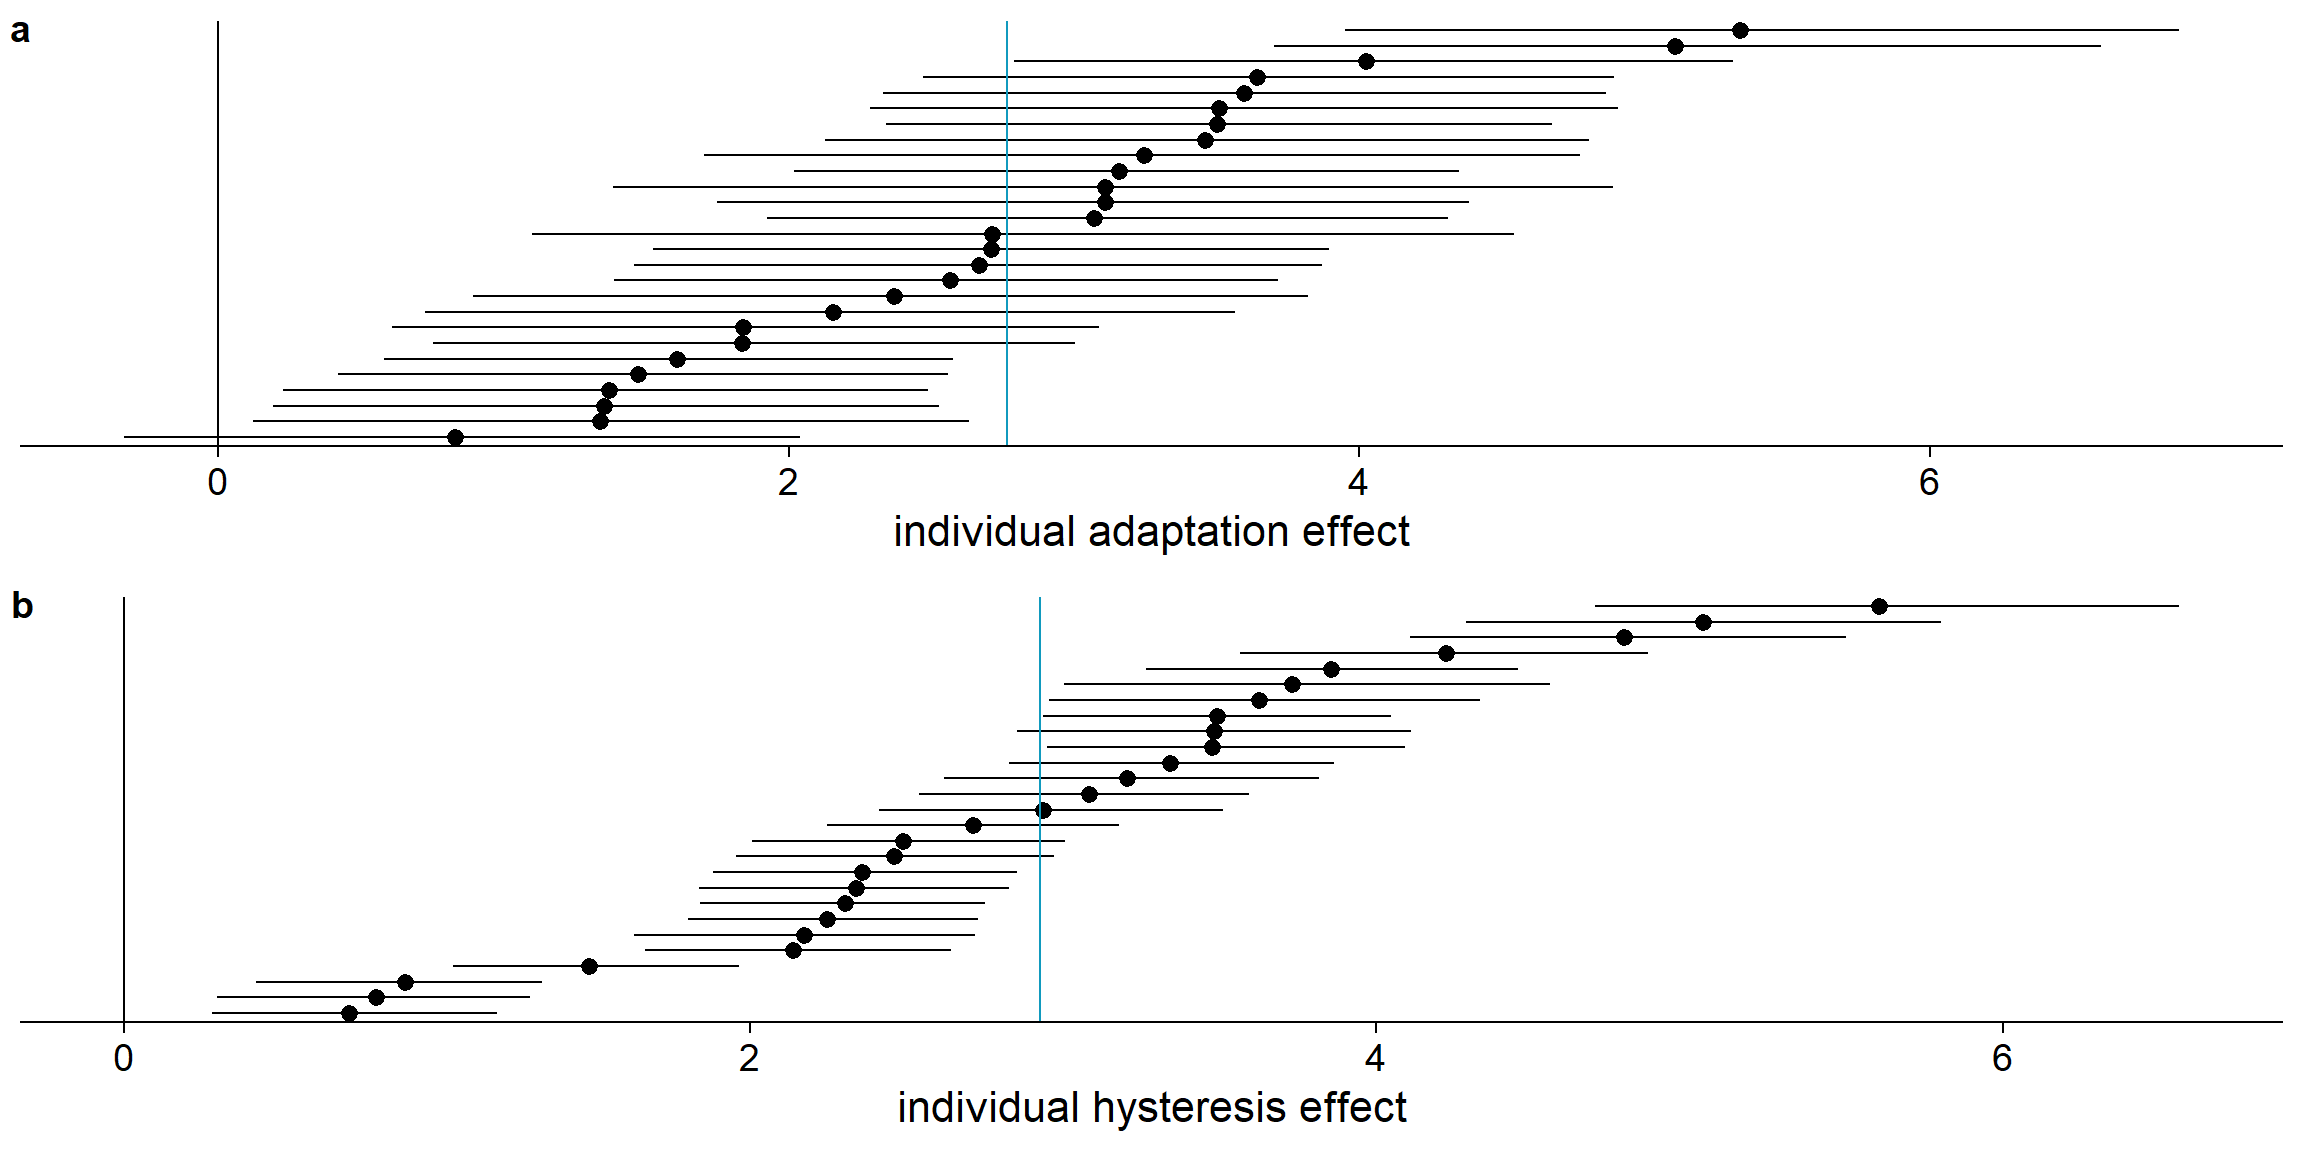 Slopes for the effect of aspect ratio and perceived L1 orientation on perceiving the 0° orientation in L2 per participant. Median and 95% highest density continuous intervals are shown. The blue line indicates the average median slope across participants. The black line indicates a slope of zero.